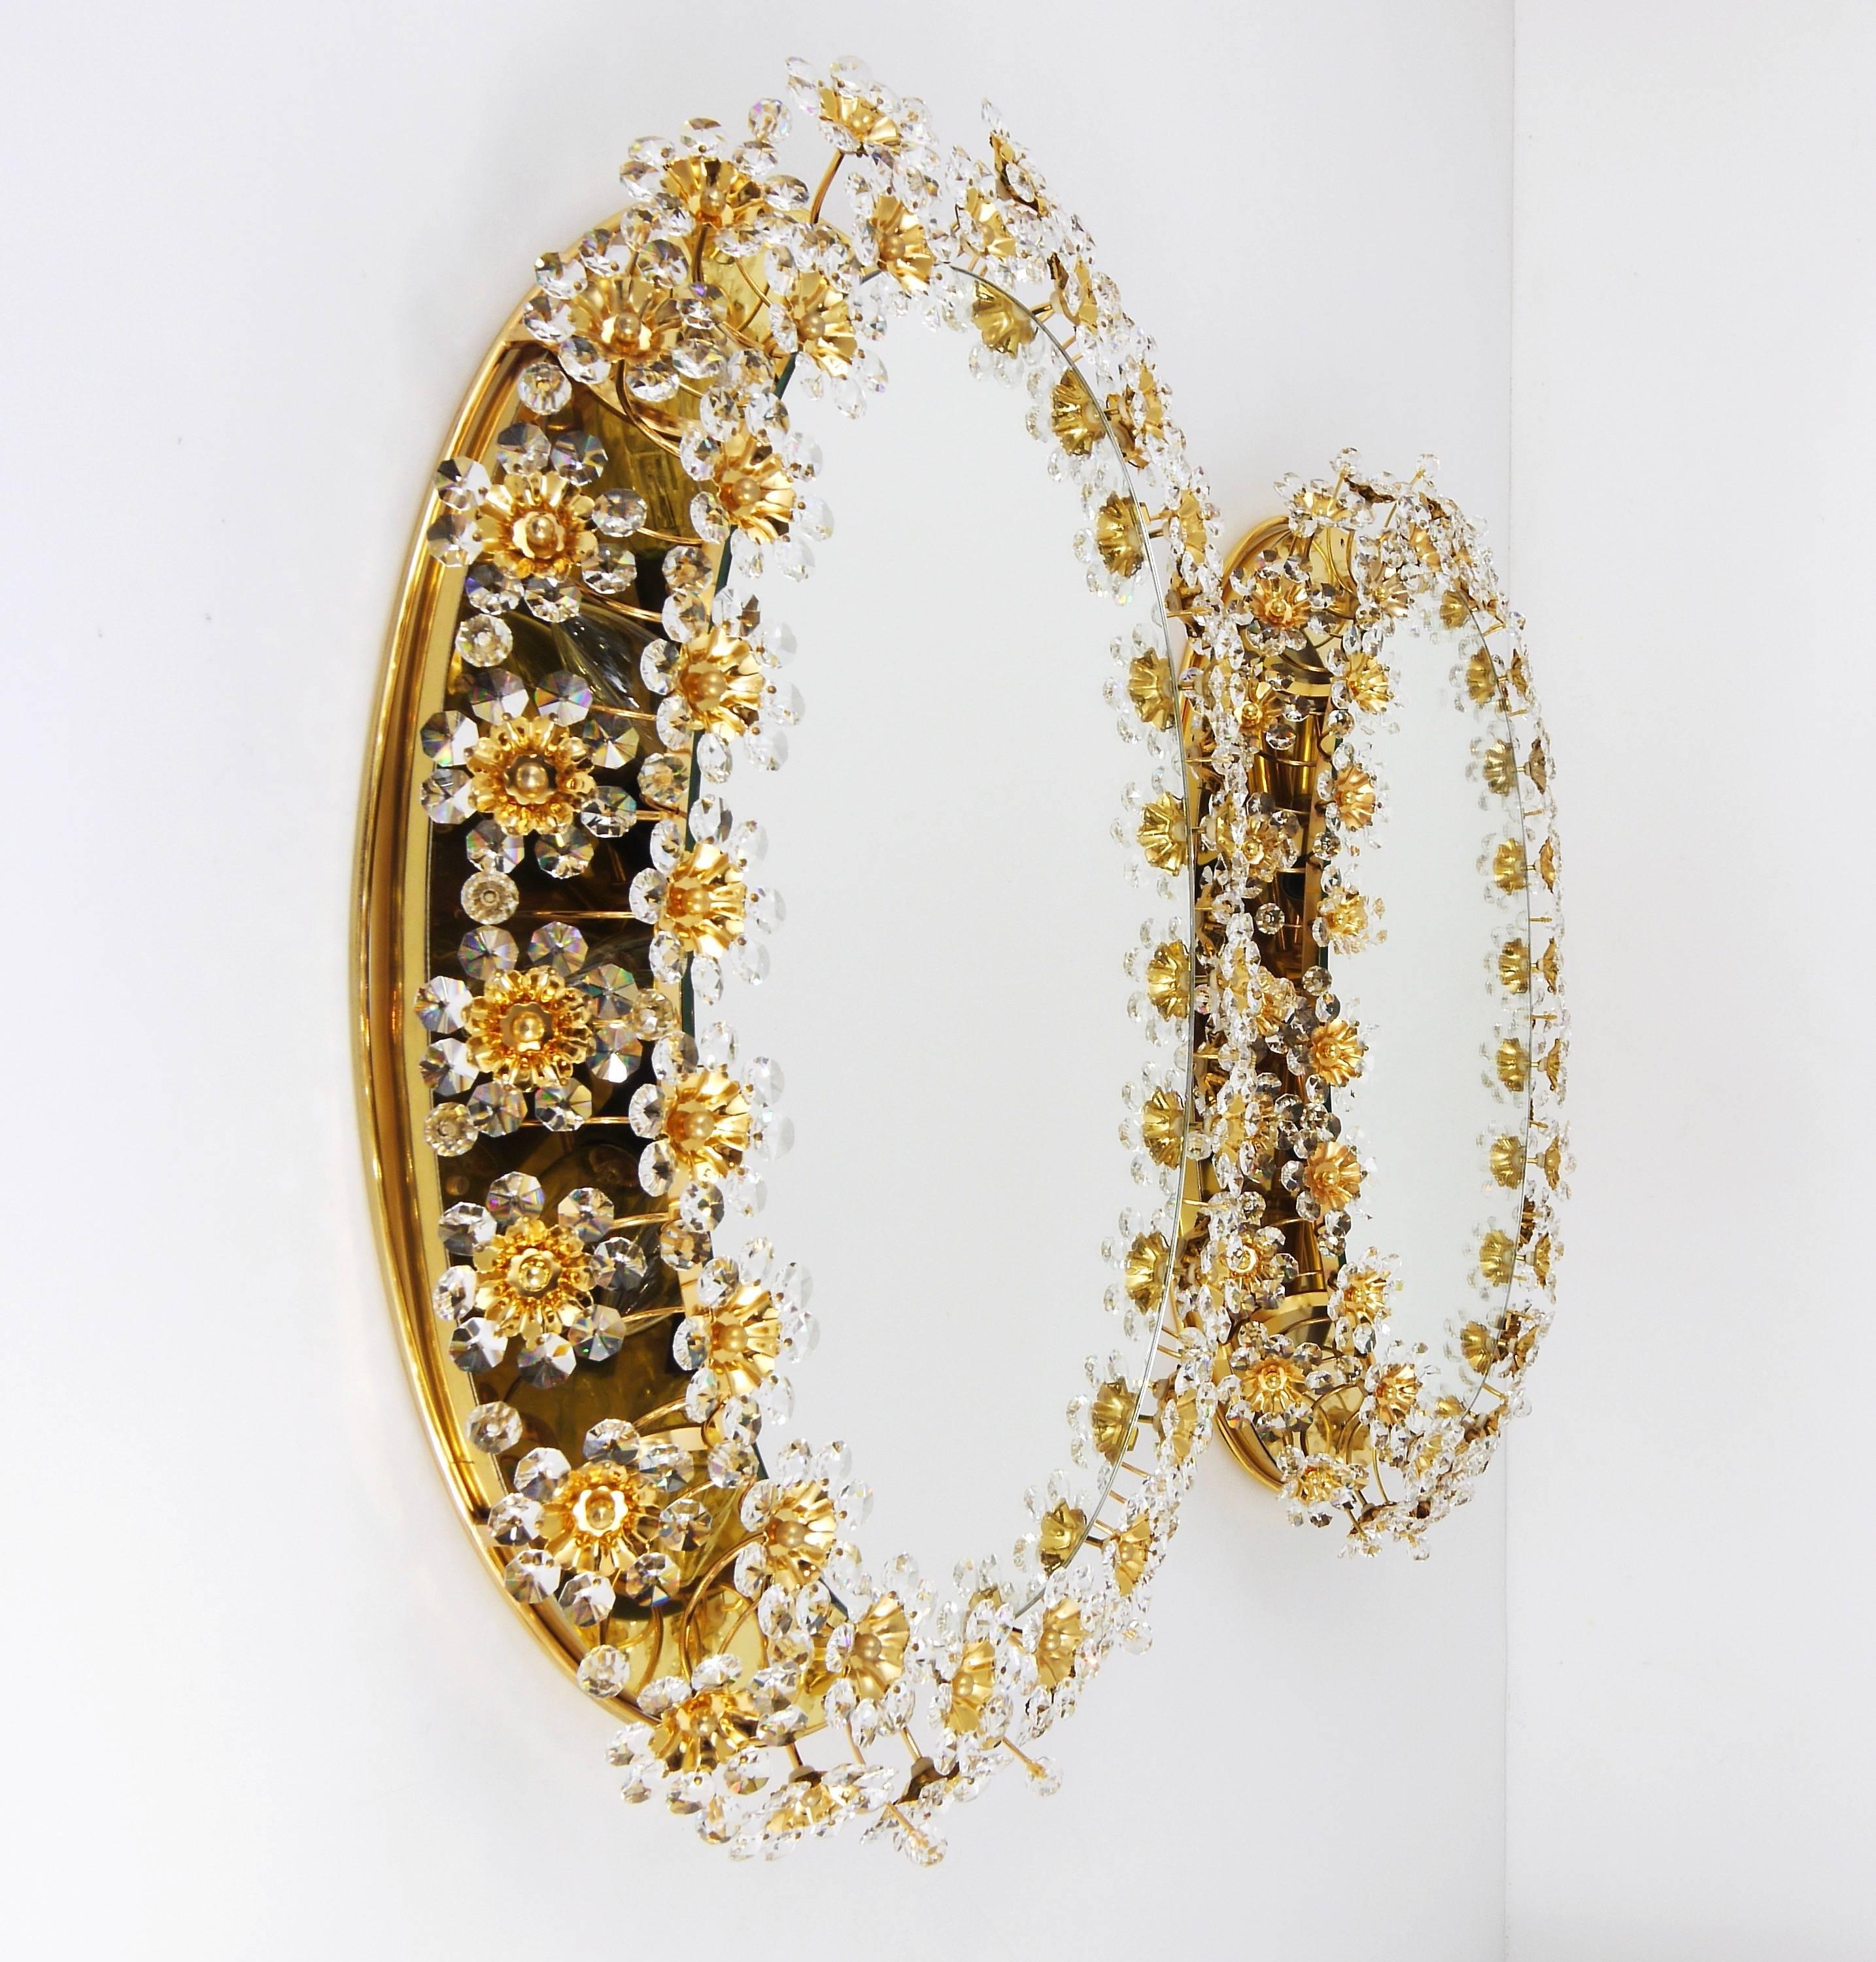 A matching pair of oval floral illuminated wall mirrors, manufactured in the 1970s by Palwa Germany. Handcrafted frame, made of gold-plated brass, covered with jewel like faceted crystal glass petals. Has ten-light sources. In excellent condition.